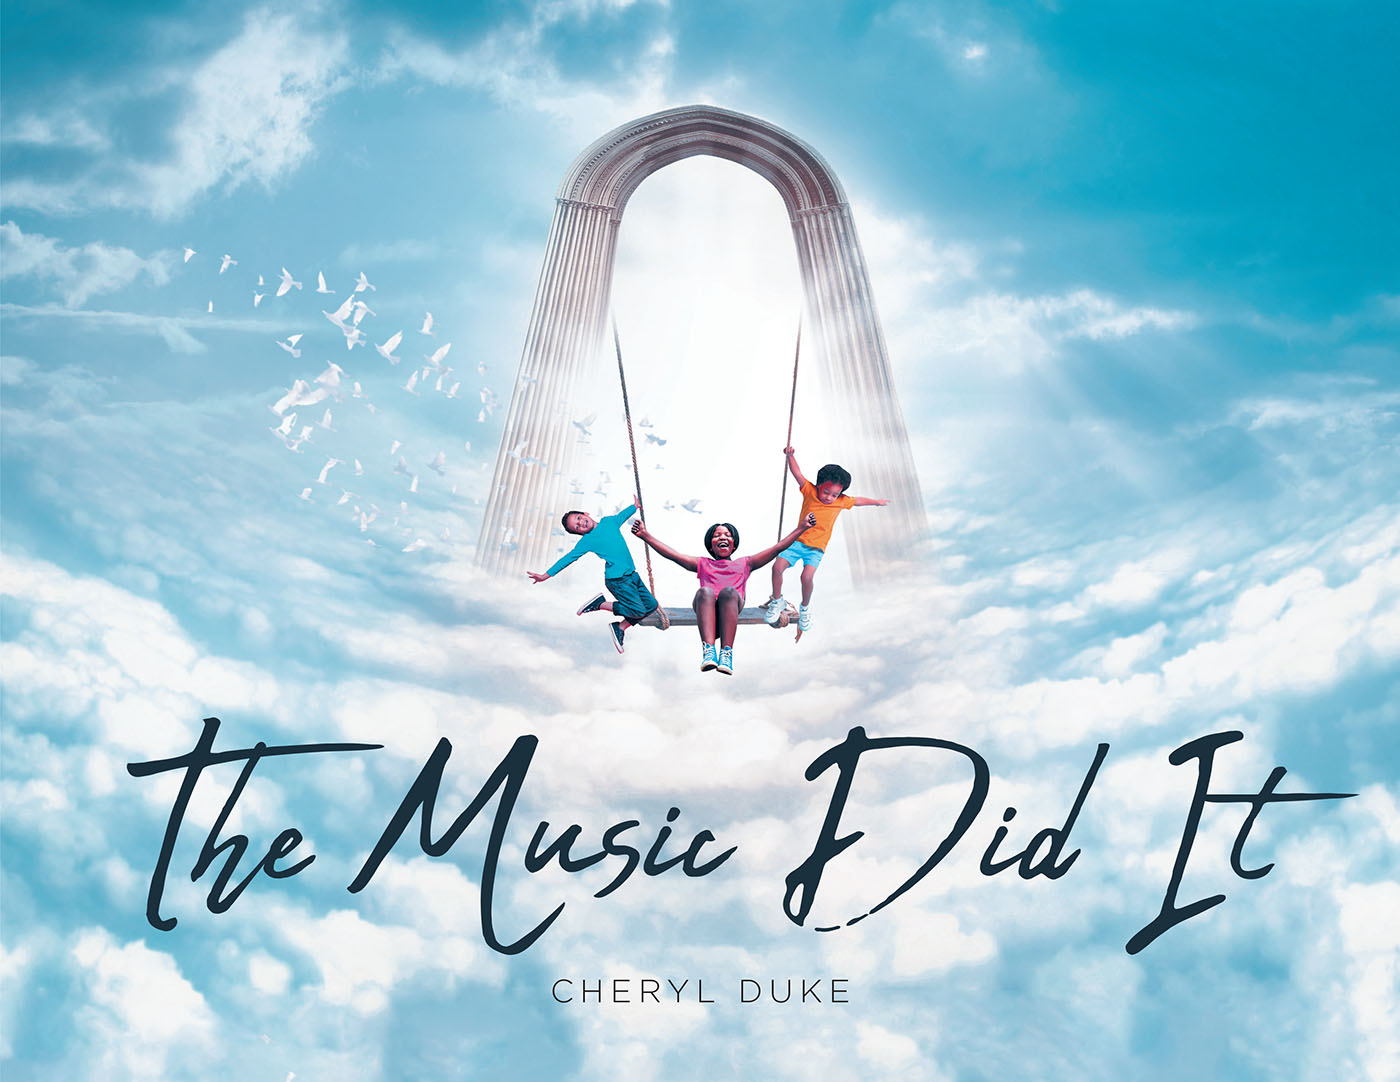 Cheryl Duke’s New Book, "The Music Did It," Tells the Story of How the Angel Gabriel Helped to Create Harmony with New Souls in Heaven Through the Power of Music